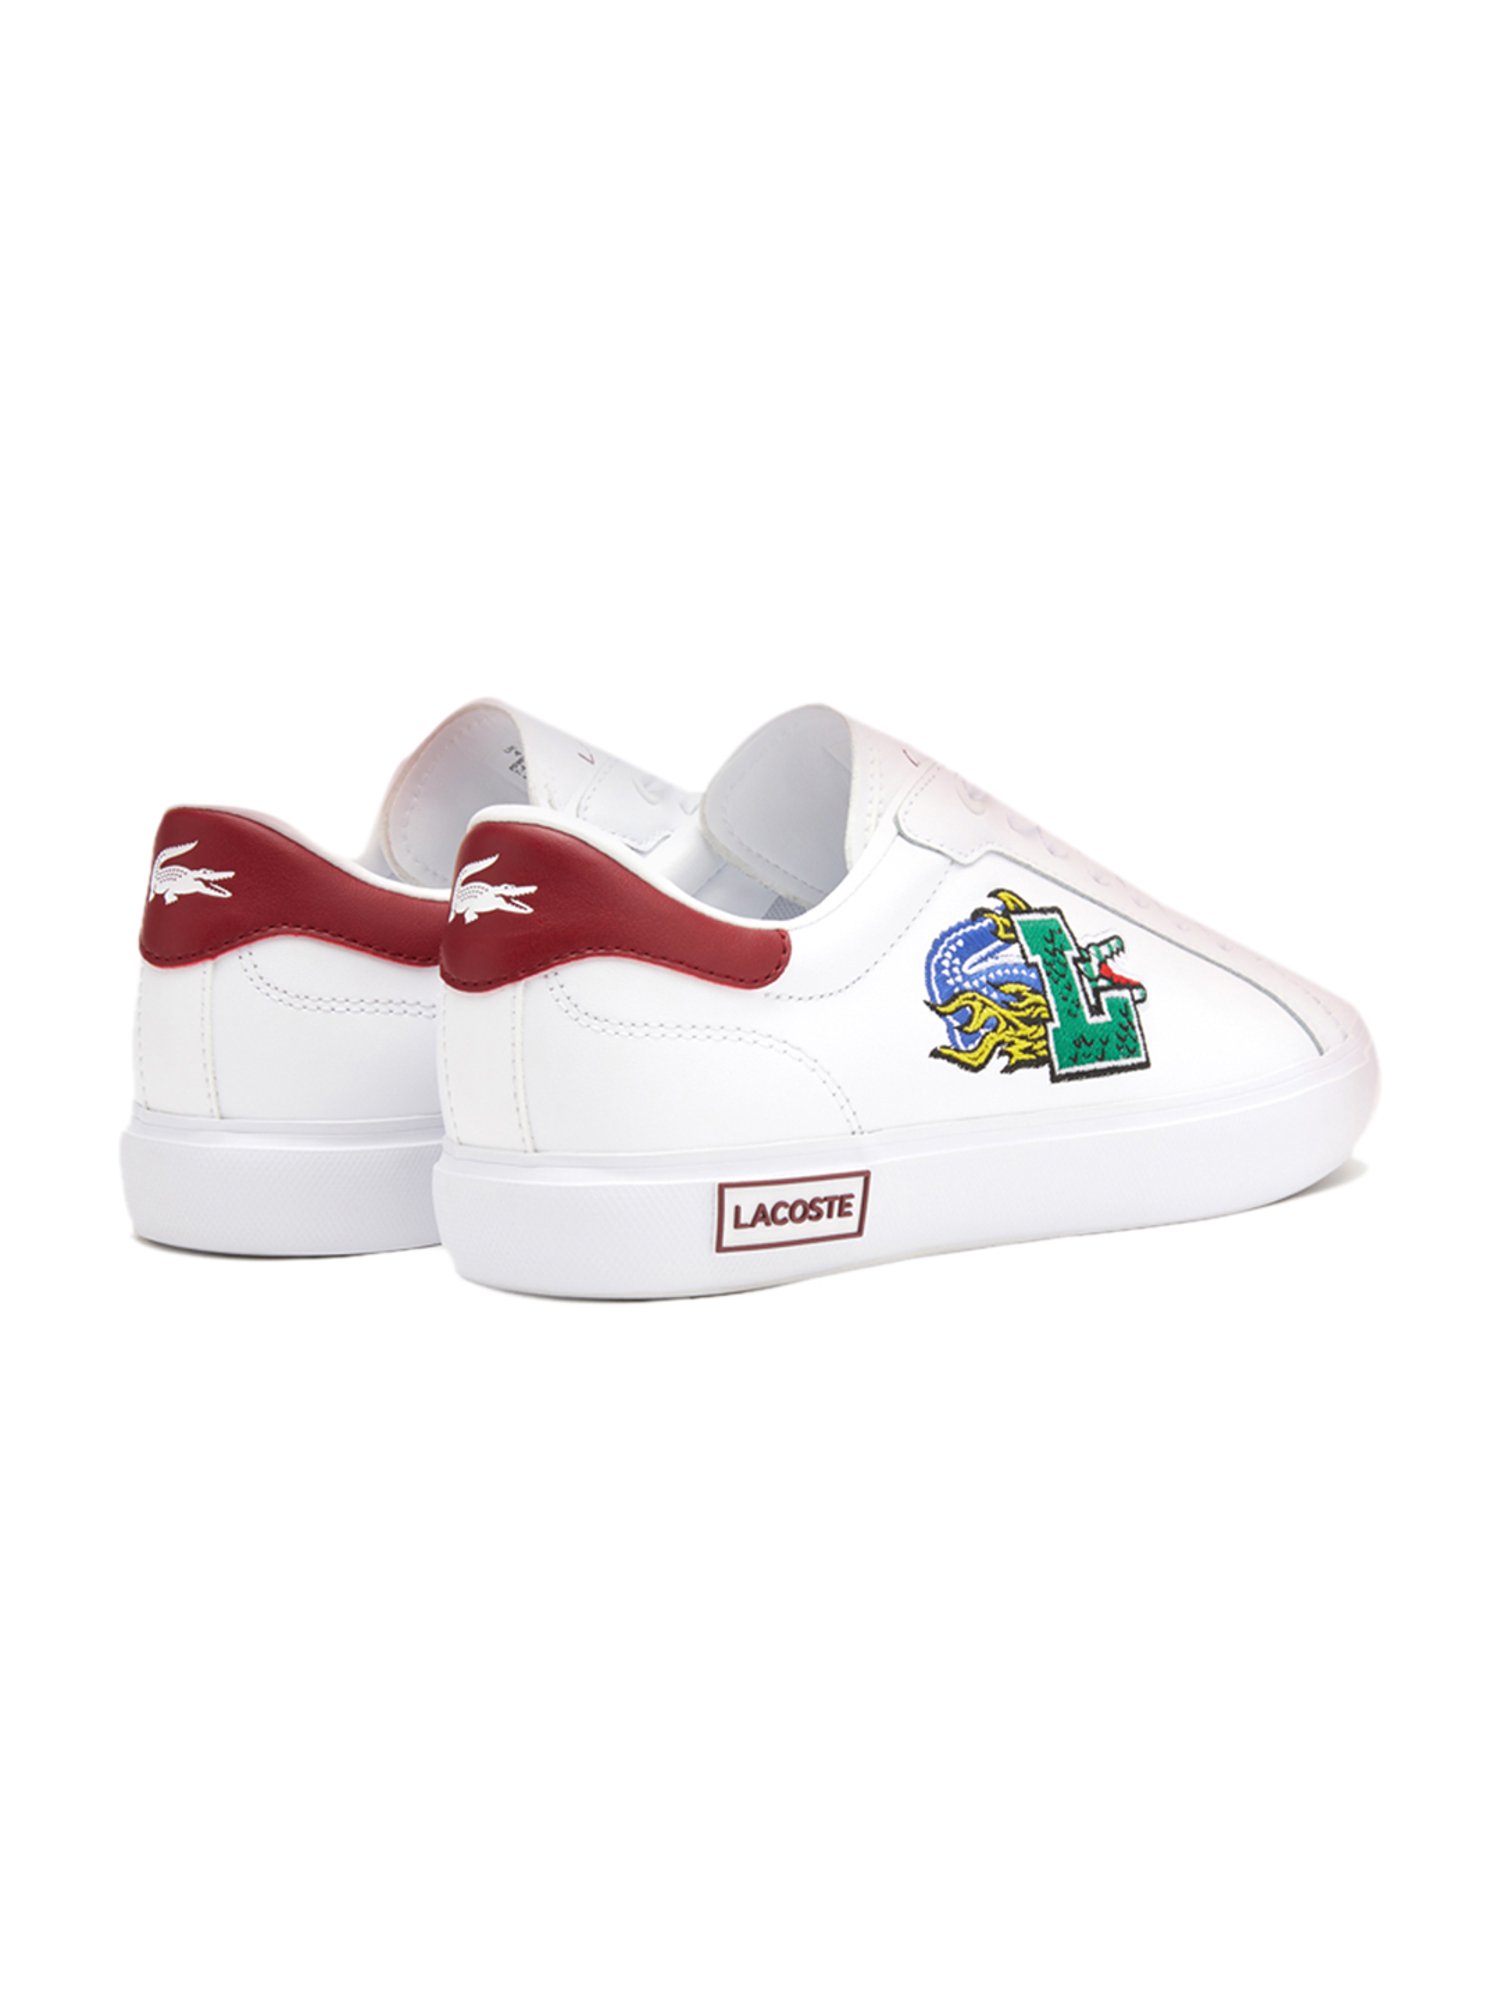 High Quality LACOSTE White Sneakers Available in Store in Ikeja - Shoes,  Bizzcouture Abiola | Jiji.ng